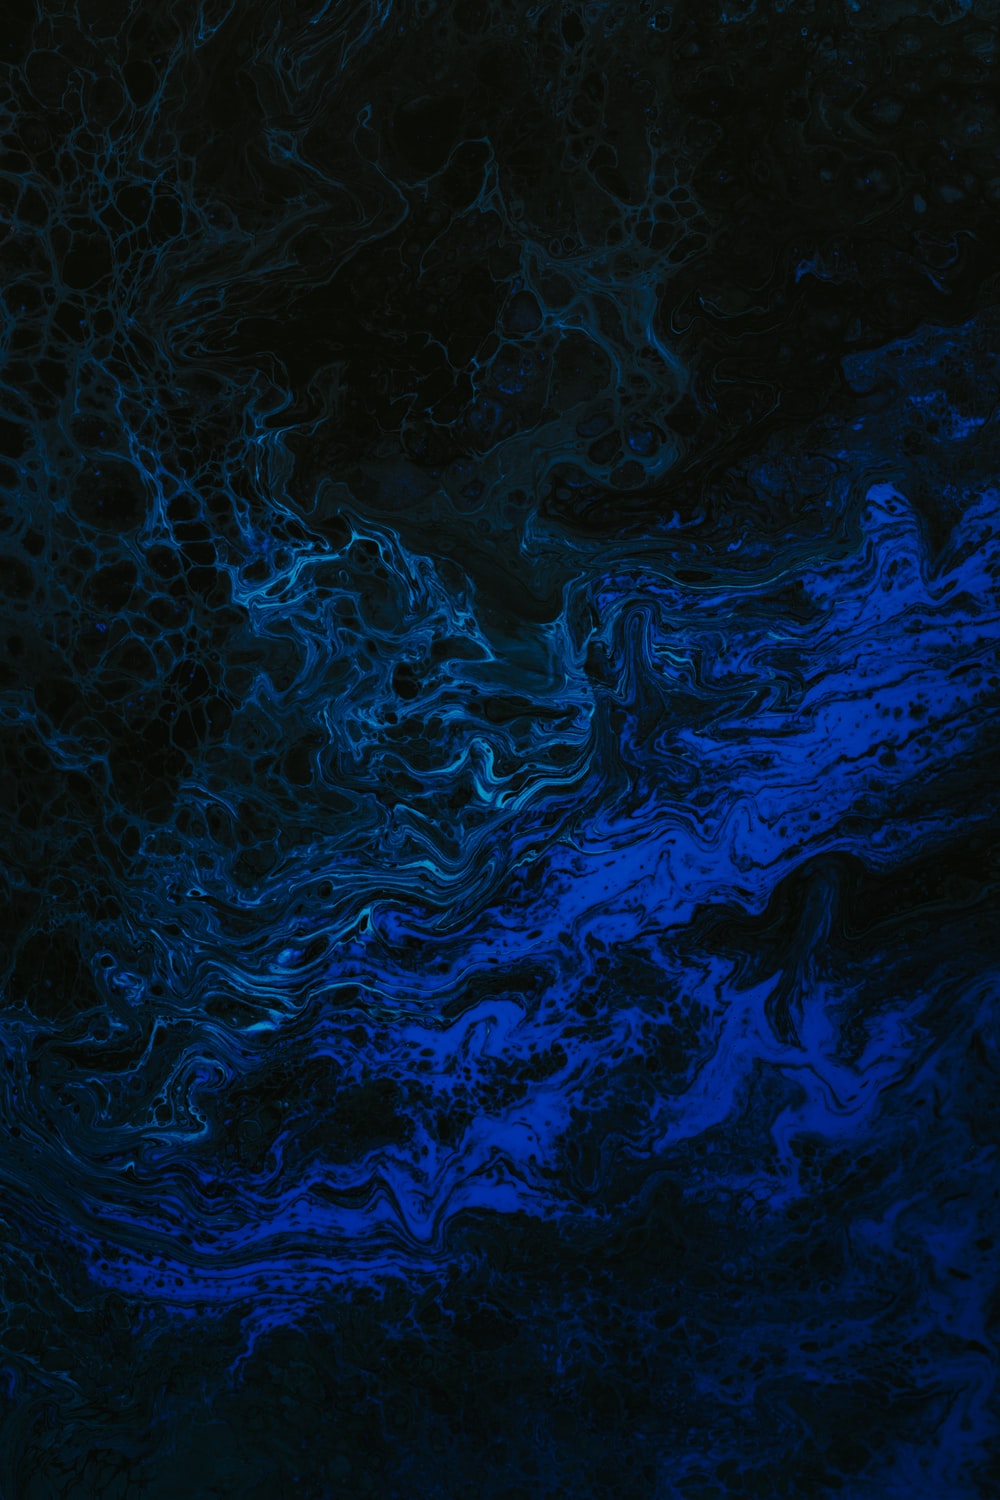 Dark Blue Texture Picture. Download Free Image